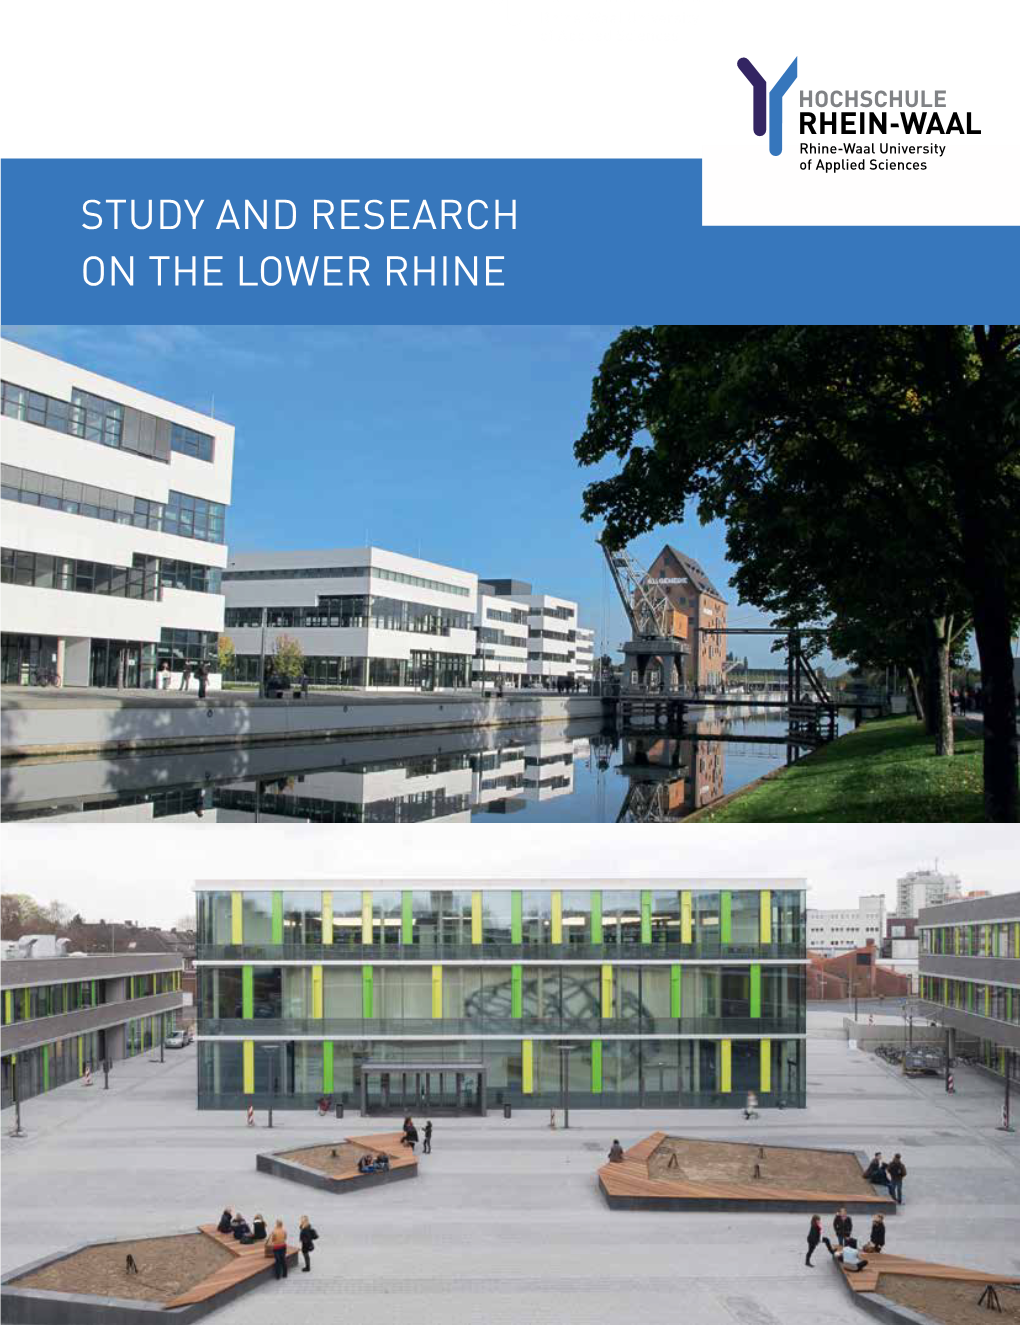 STUDY and RESEARCH on the LOWER RHINE PUBLICATION DETAILS © 2012 Rhine-Waal University of Applied Sciences, Kleve/Kamp-Lintfort 2Nd Revised Edition, 2014